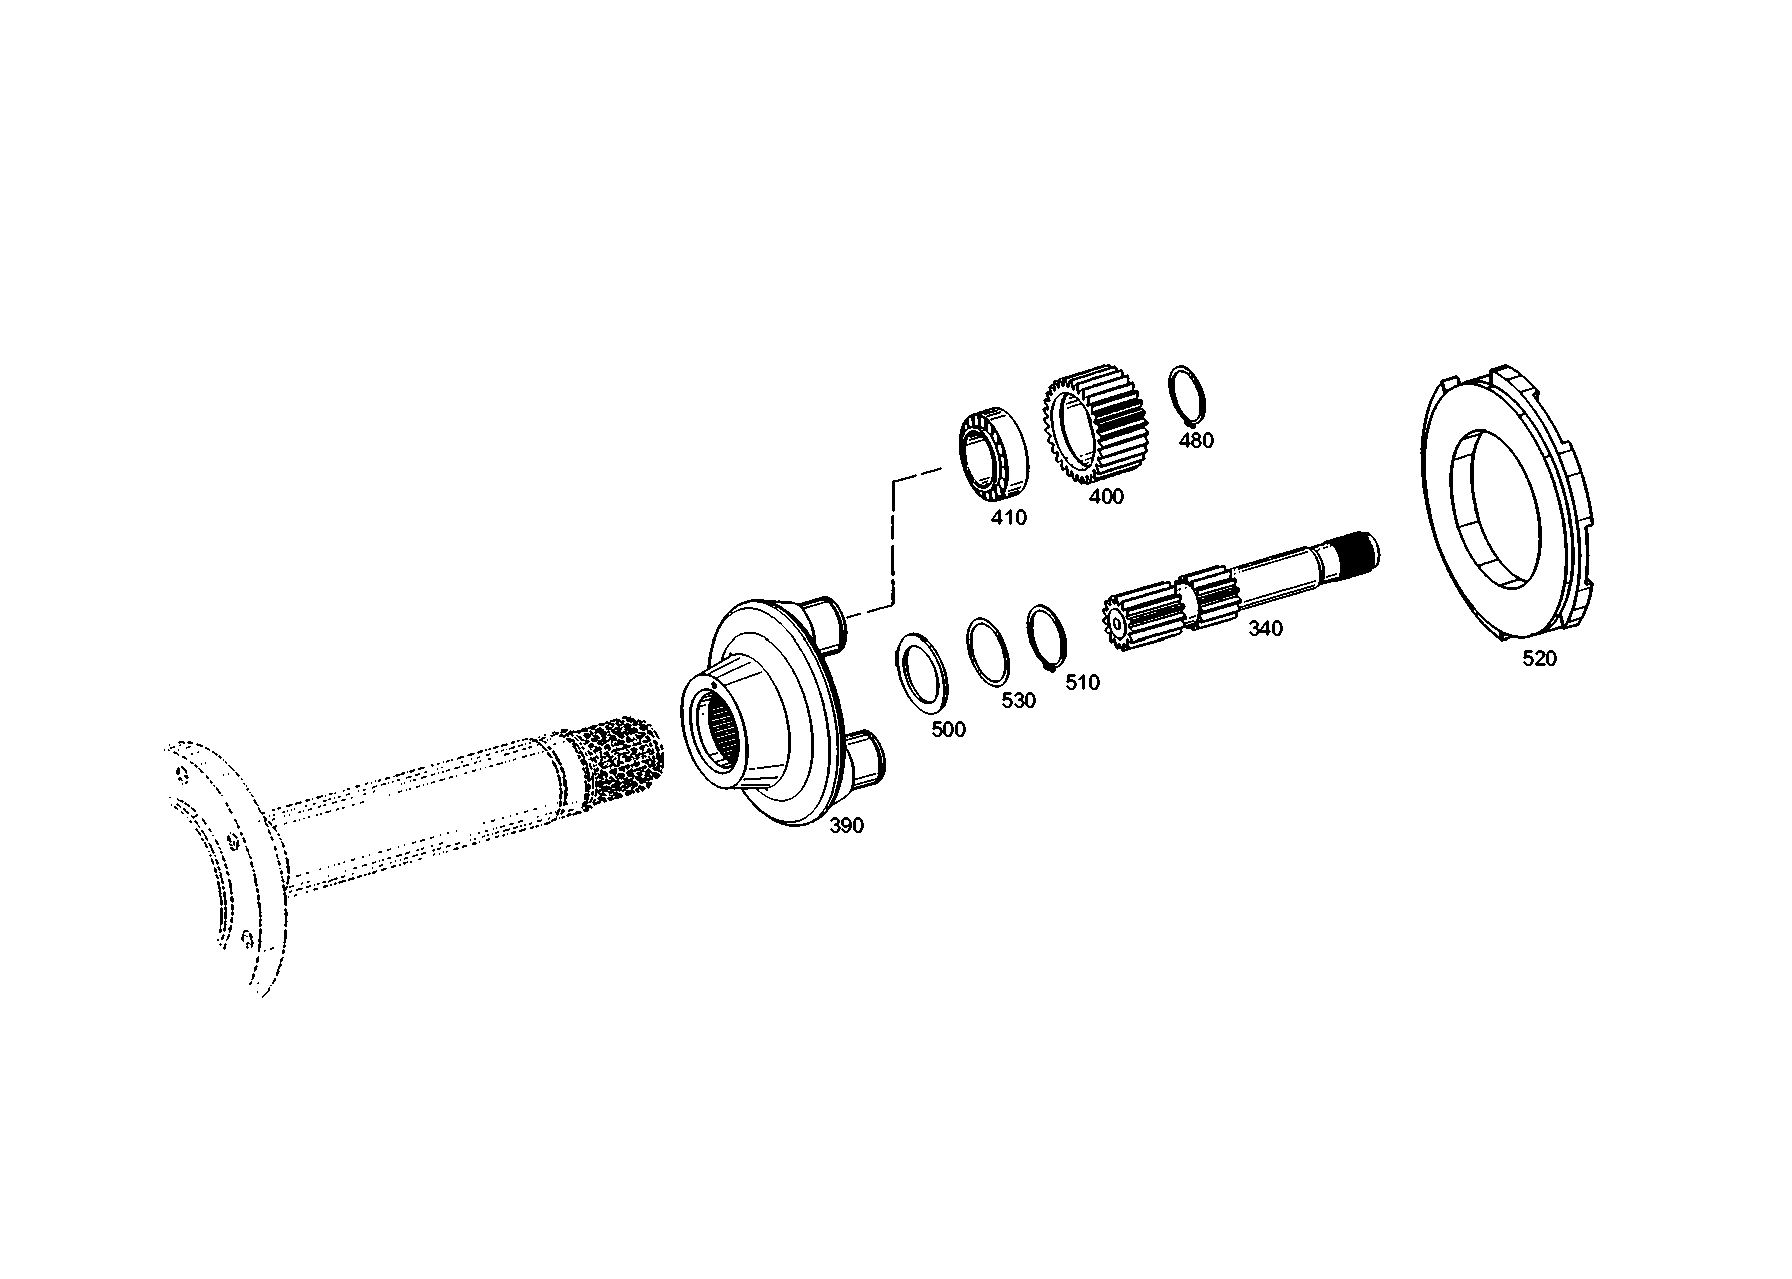 drawing for HAMM AG 1282379 - WASHER (figure 5)